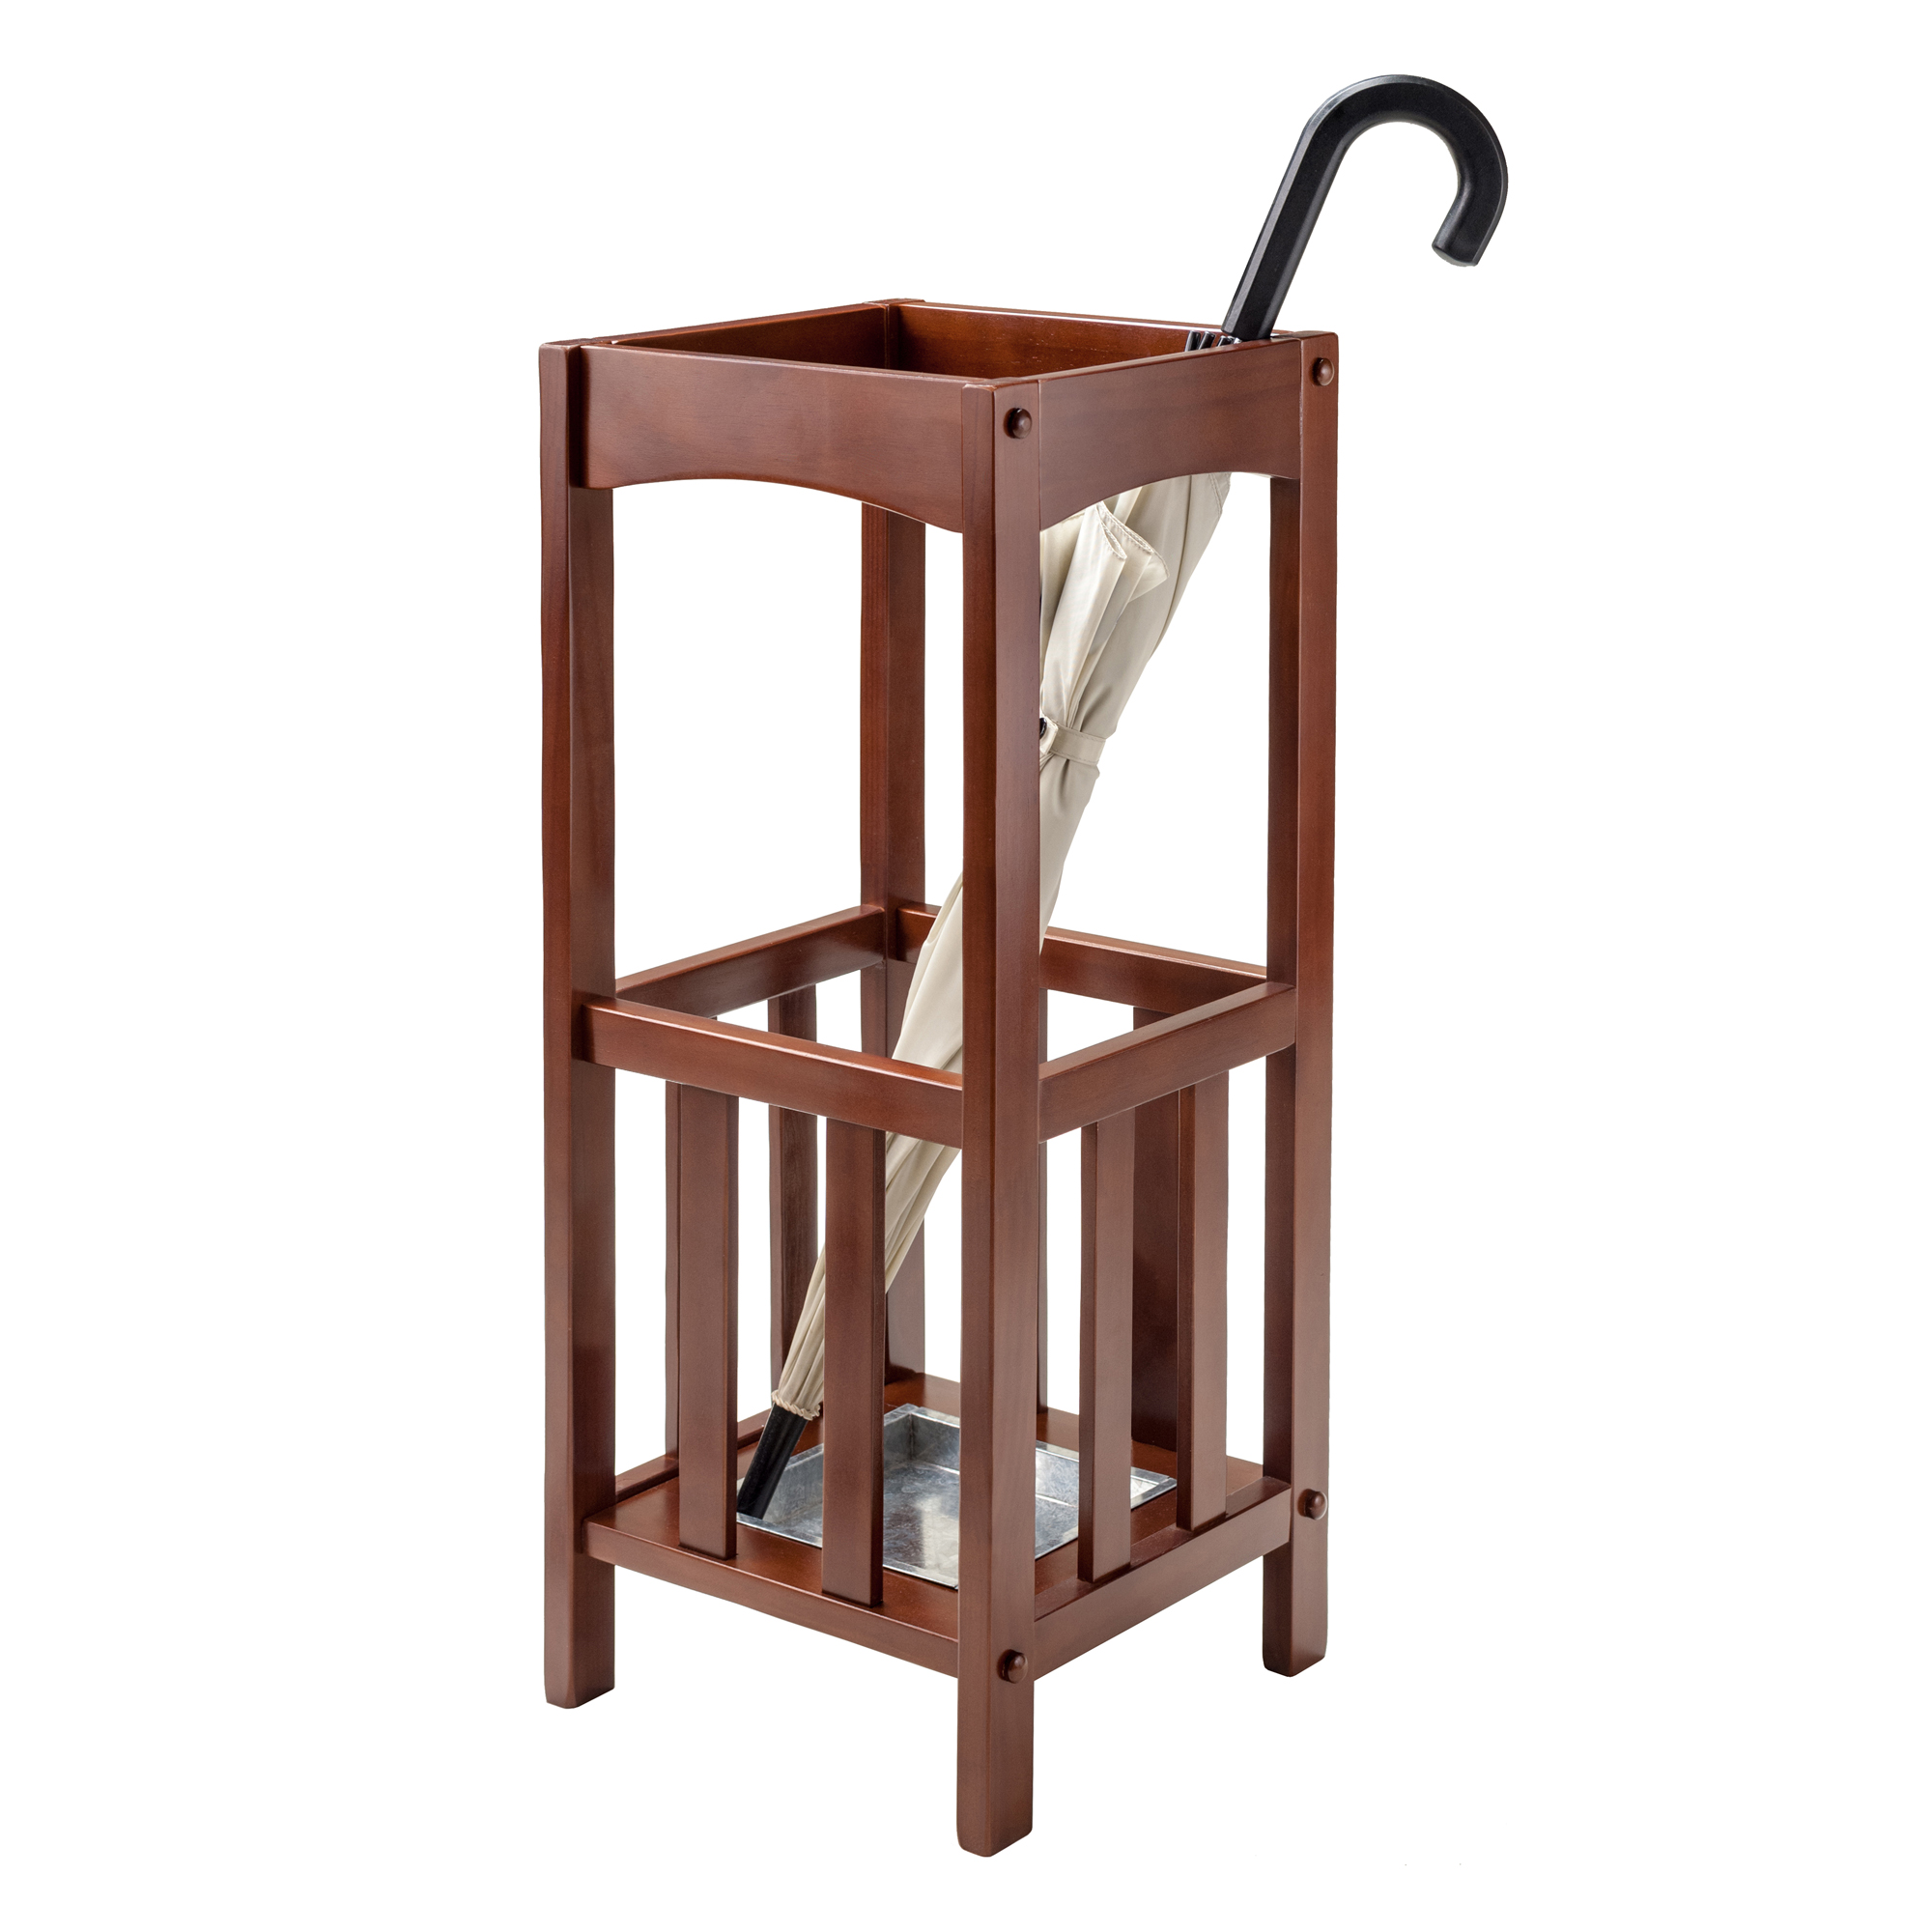 Winsome Wood Rex Umbrella Stand with Metal Tray, Walnut Finish